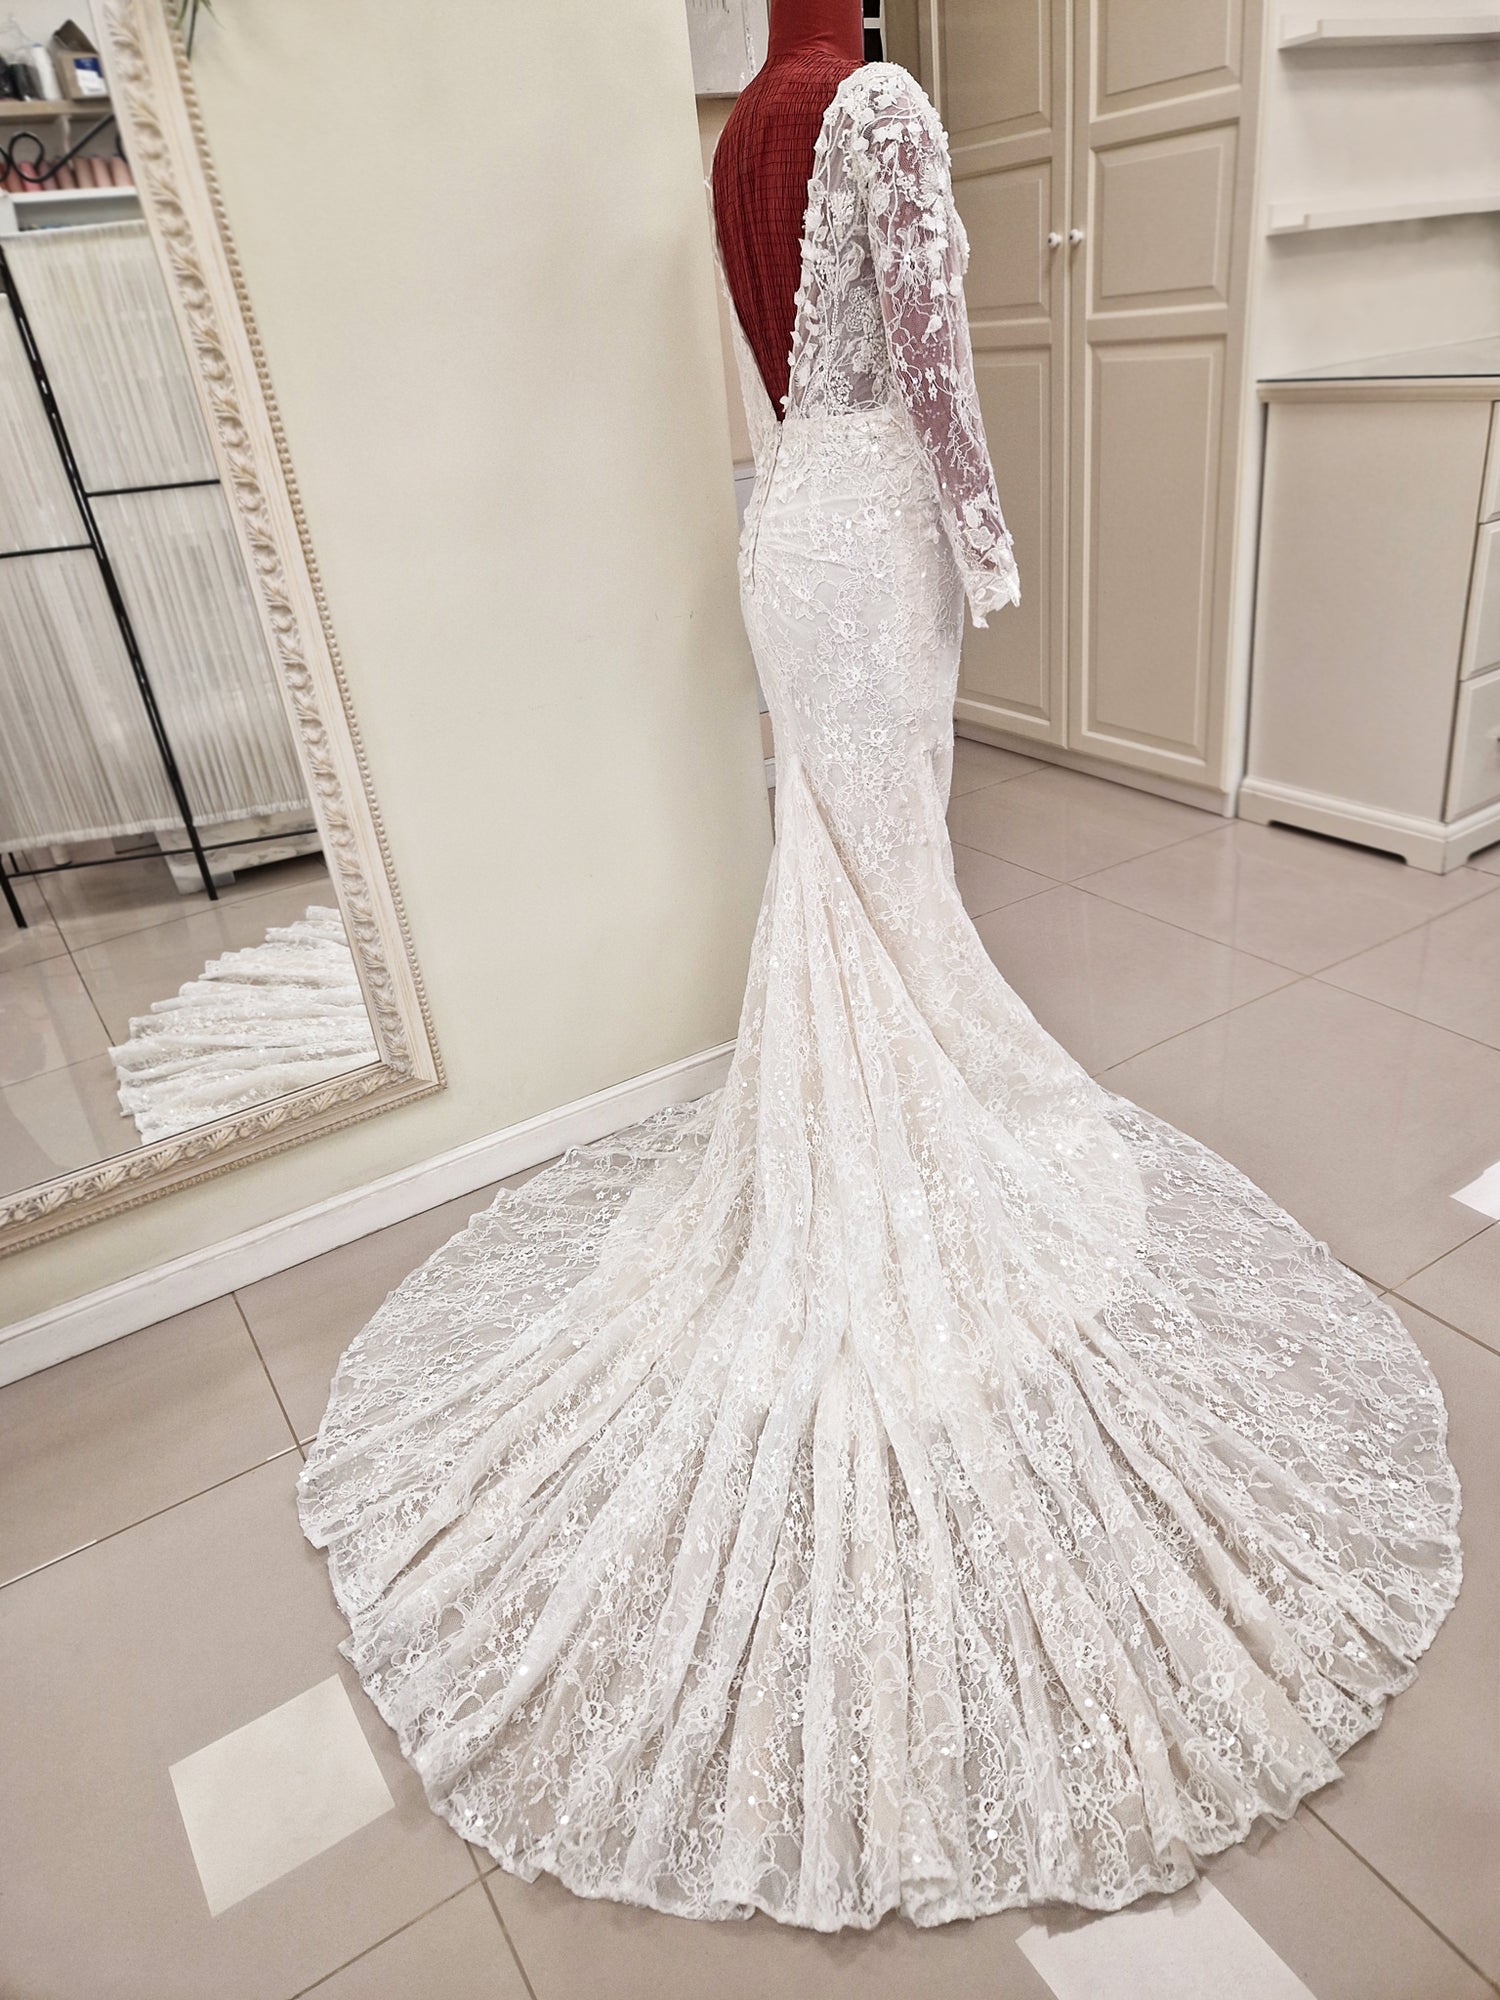 Lace wedding dress from our 2024 couture collection. The gown has a figure hugging trumpet silhouette, long sleeves, deep plunging V-neckline and V-back and lots of beading and sparkle. There is a dramatic semi-cathedral train and ruching at center back seam to beautifully shape your figure.